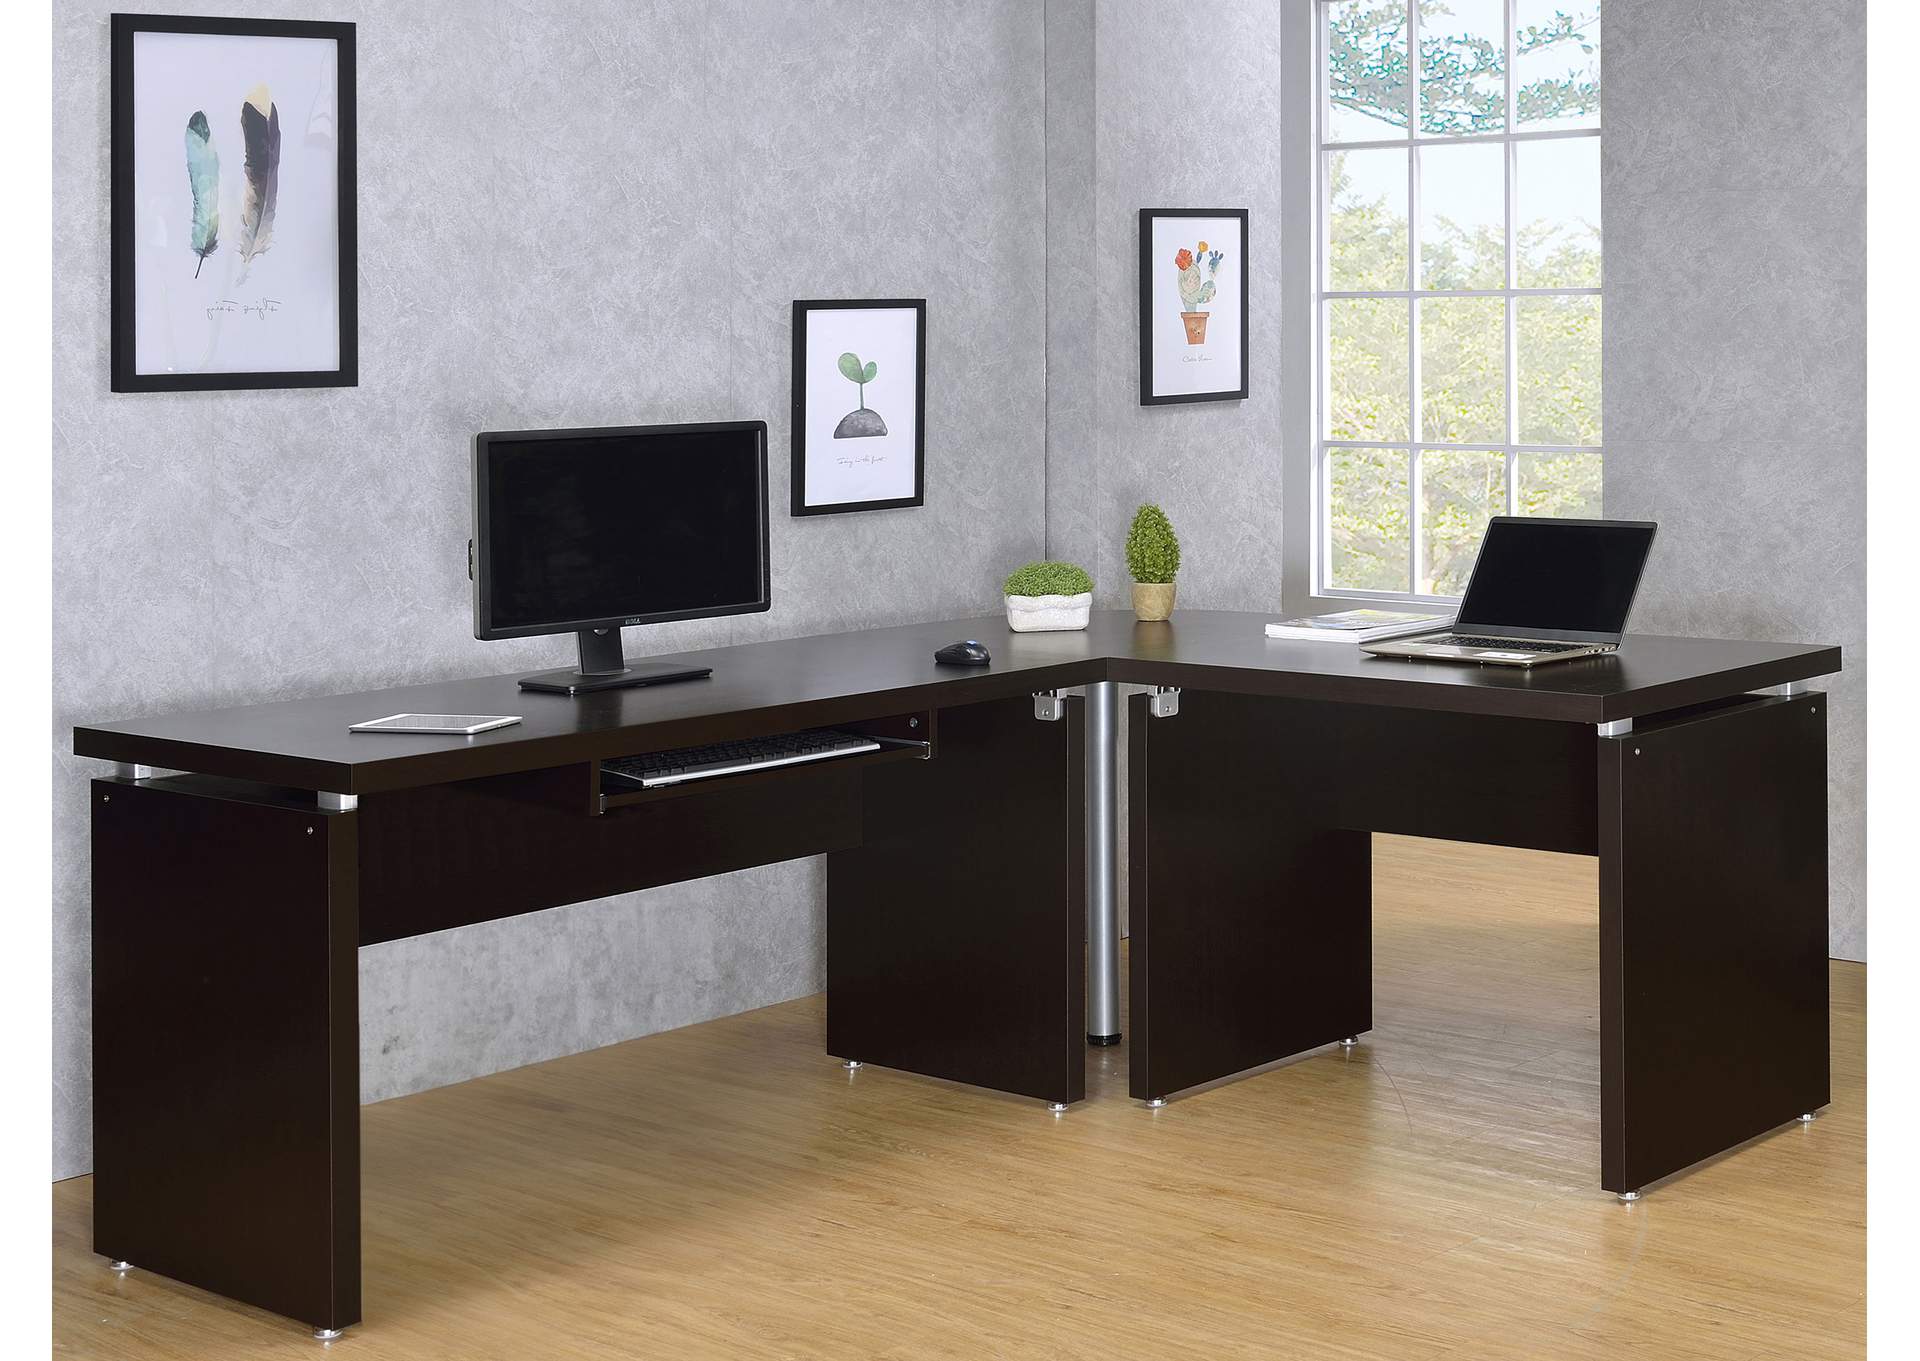 Skylar Computer Desk with Keyboard Drawer Cappuccino,Coaster Furniture